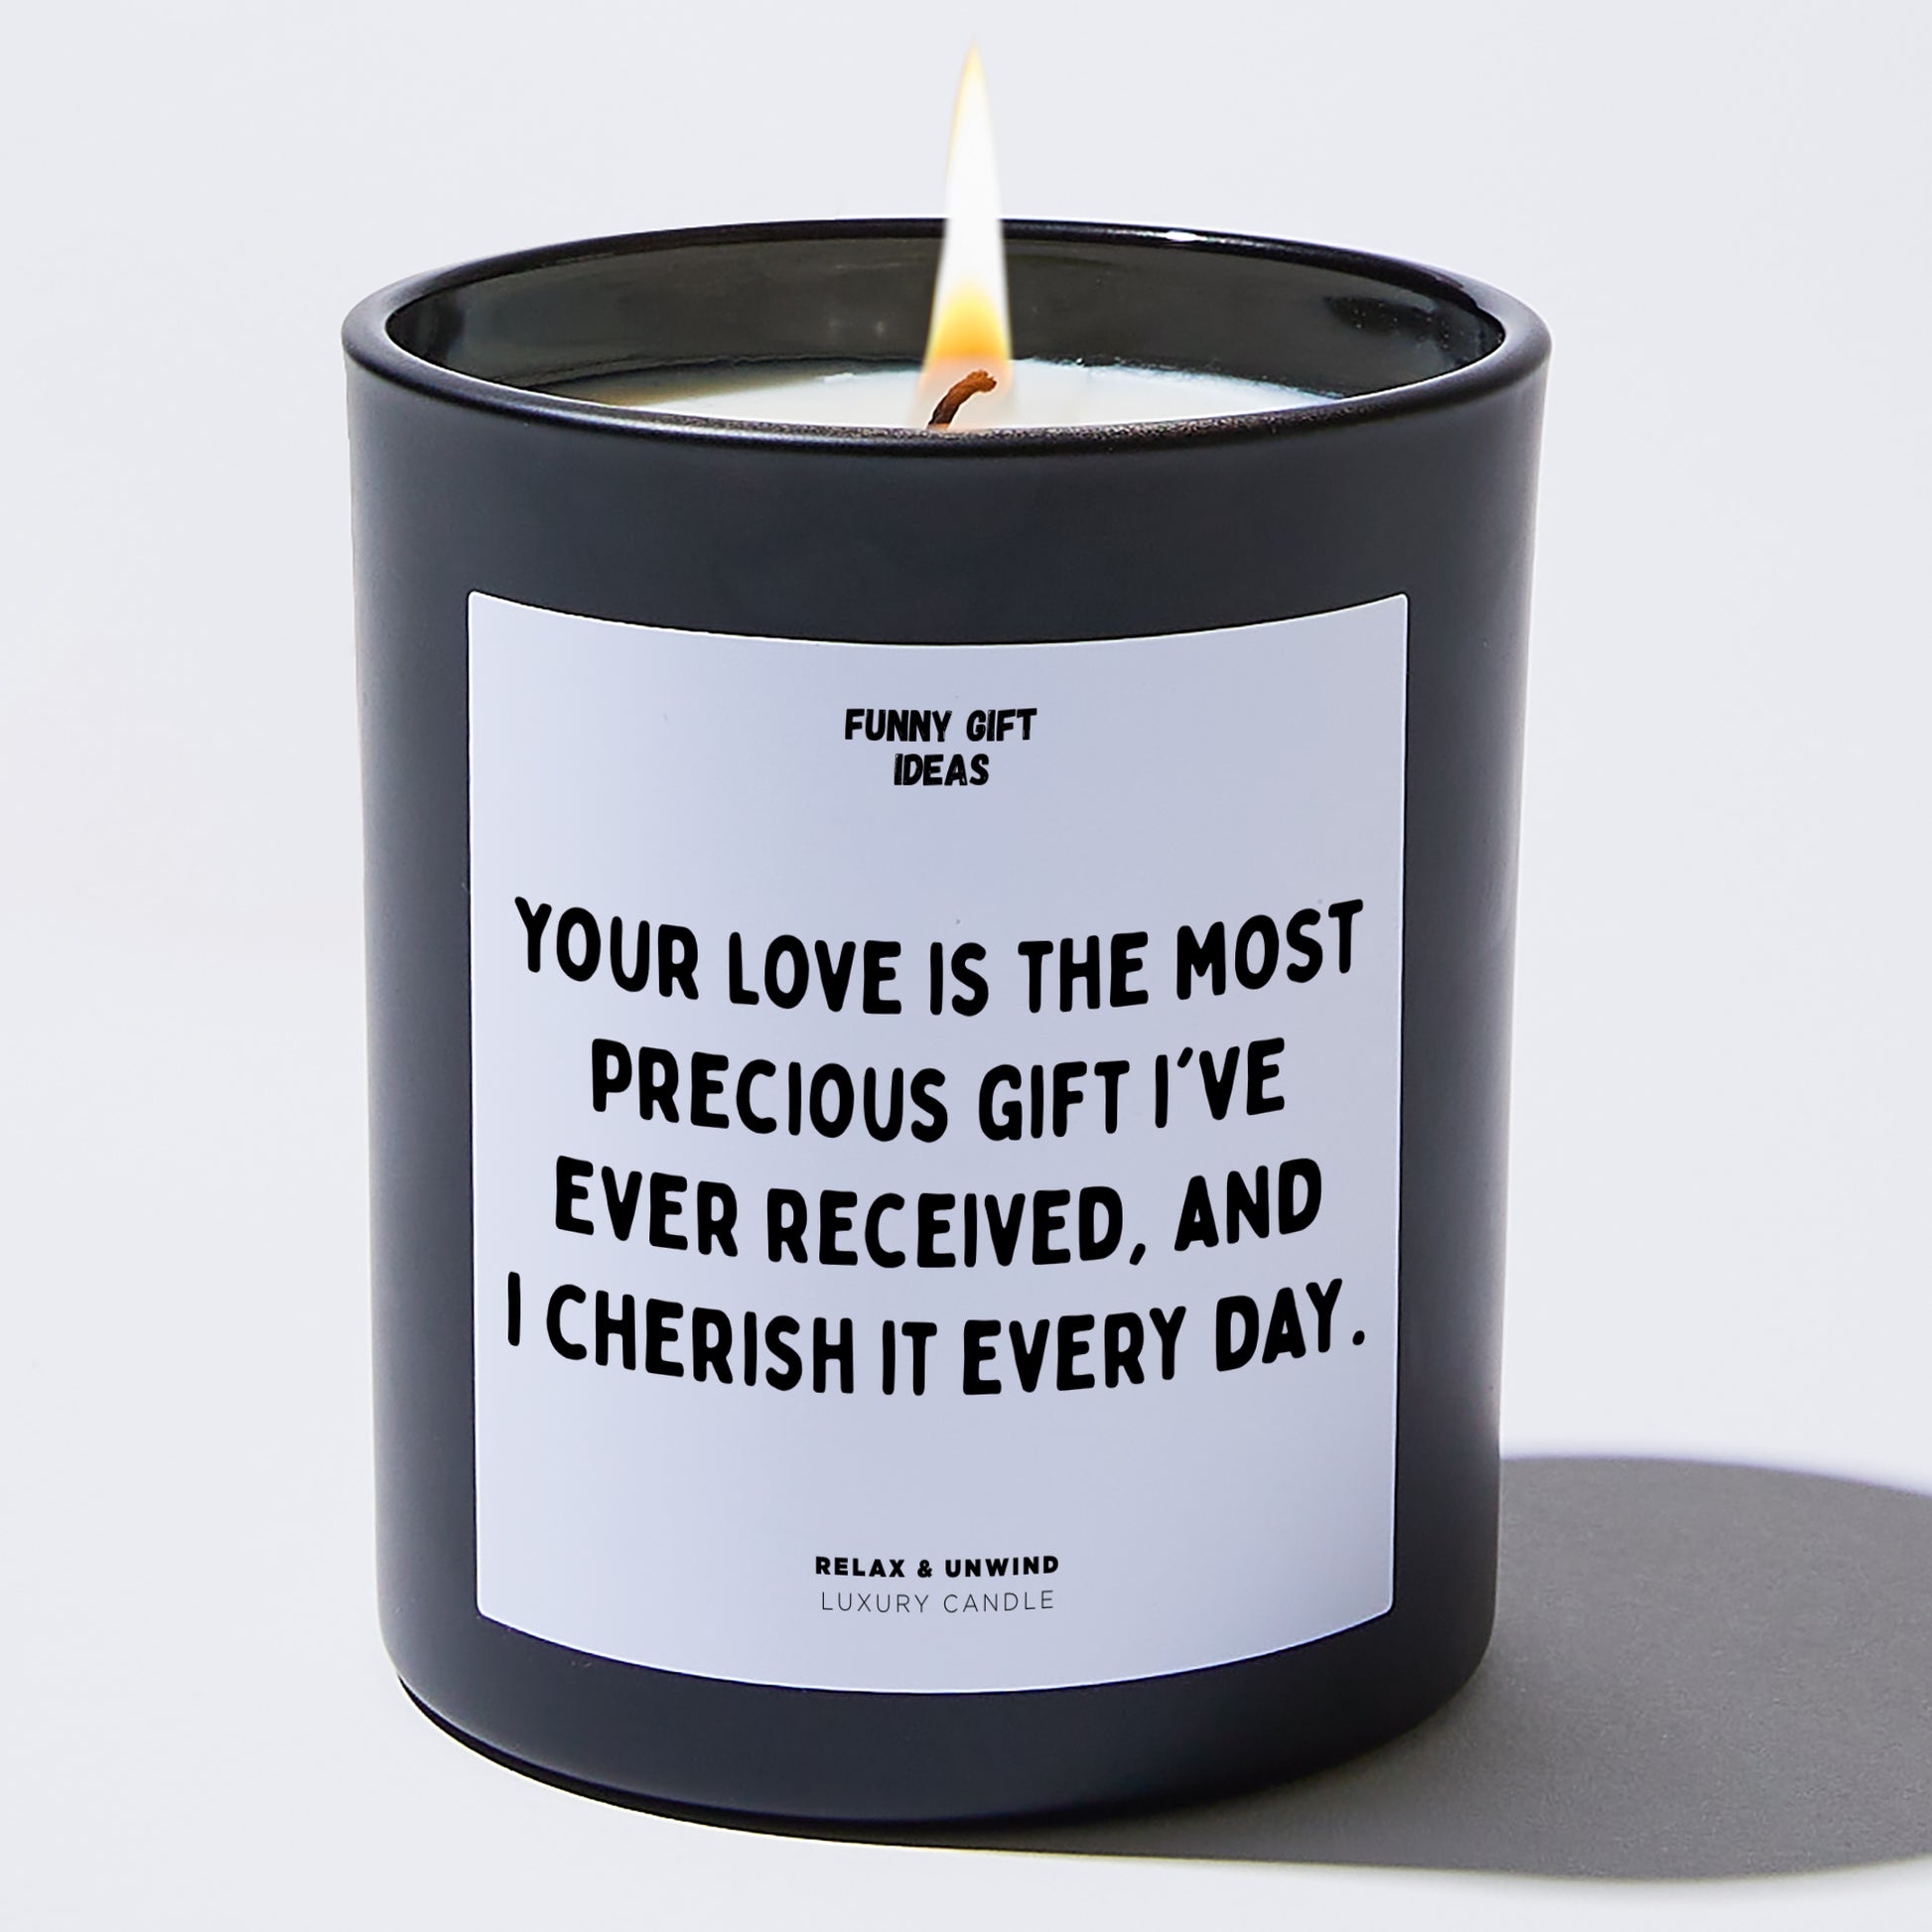 Anniversary Your Love is the Most Precious Gift I've Ever Received, and I Cherish It Every Day. - Funny Gift Ideas